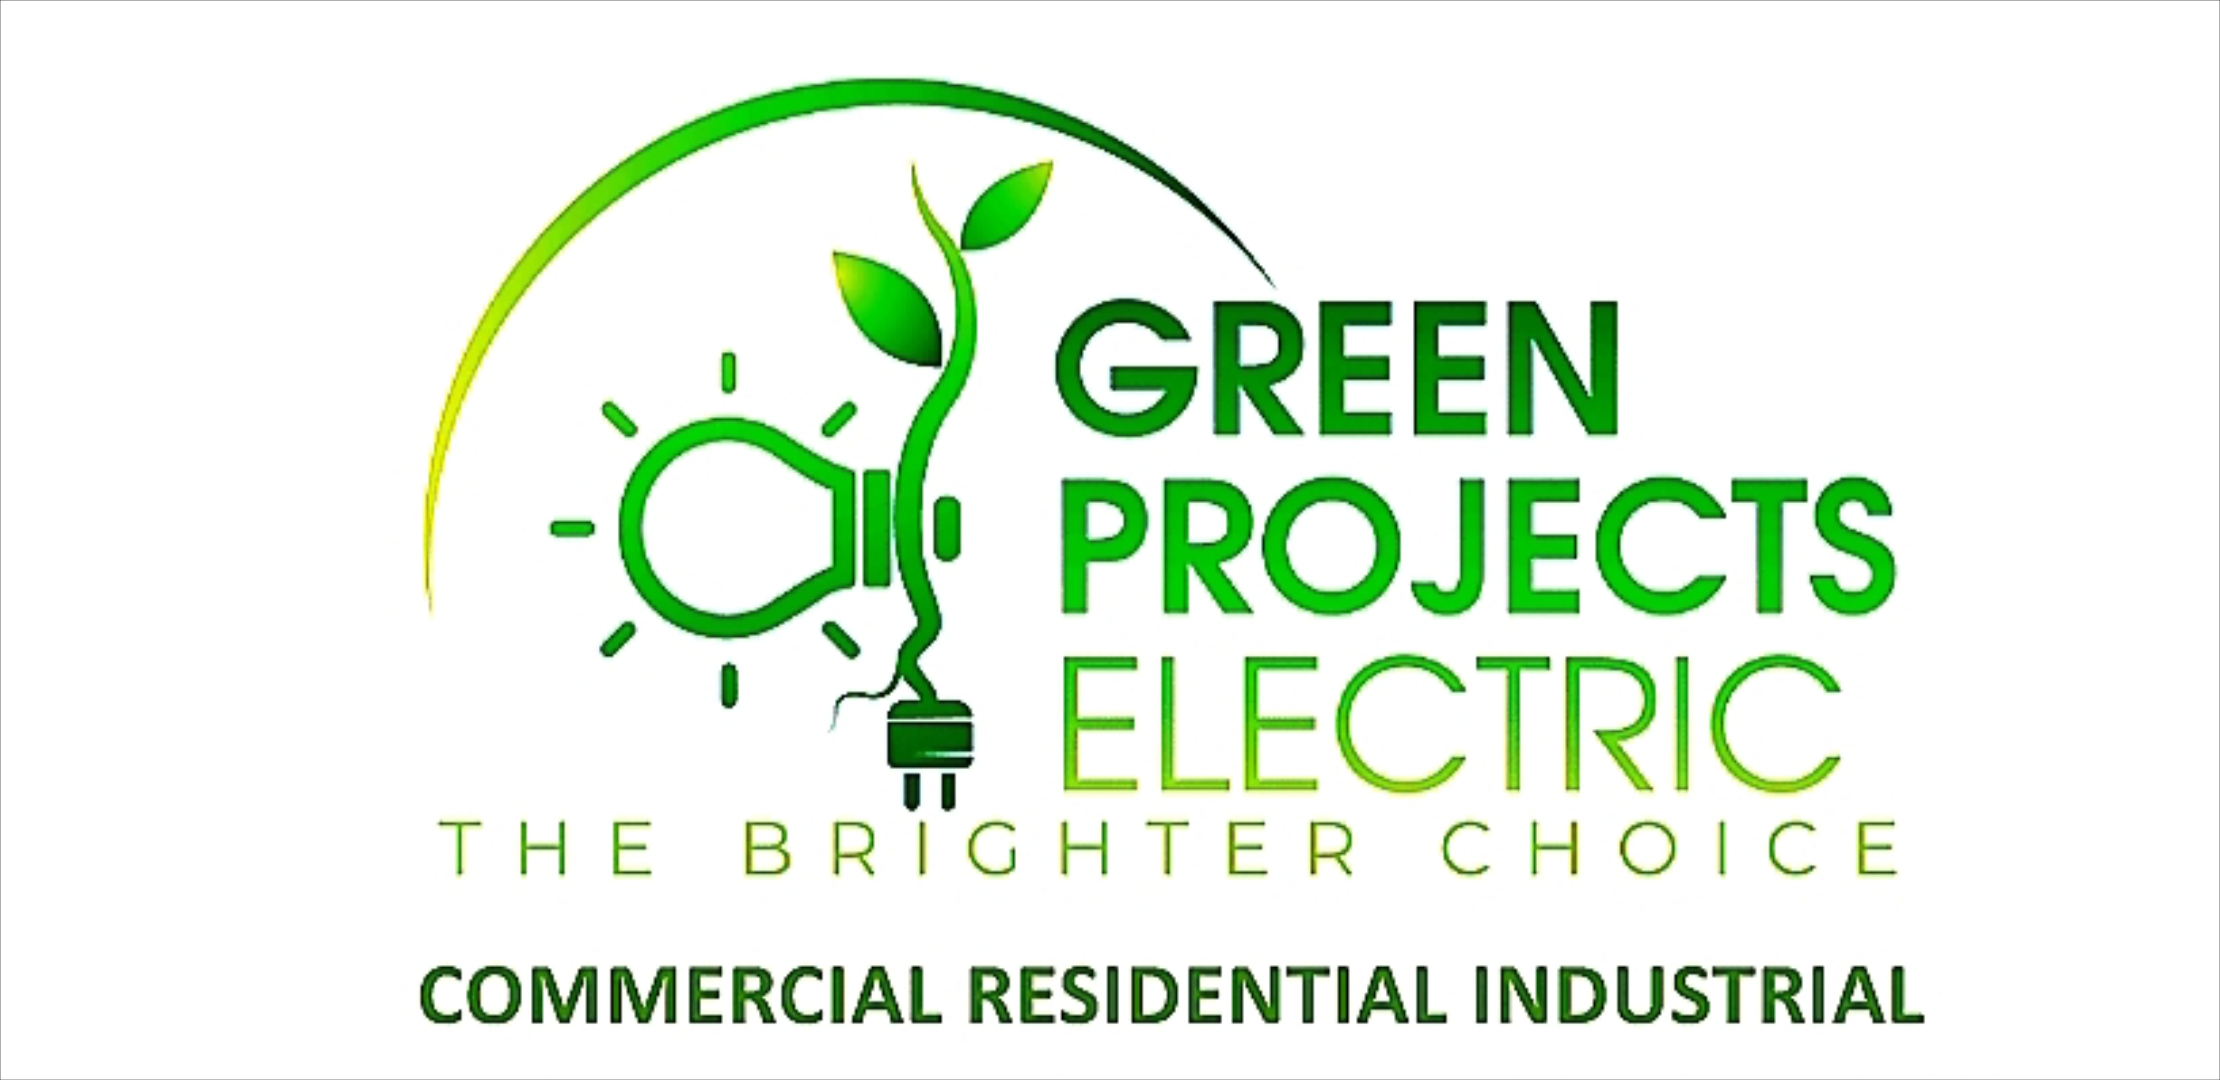 Green Projects Electric Ltd's logo